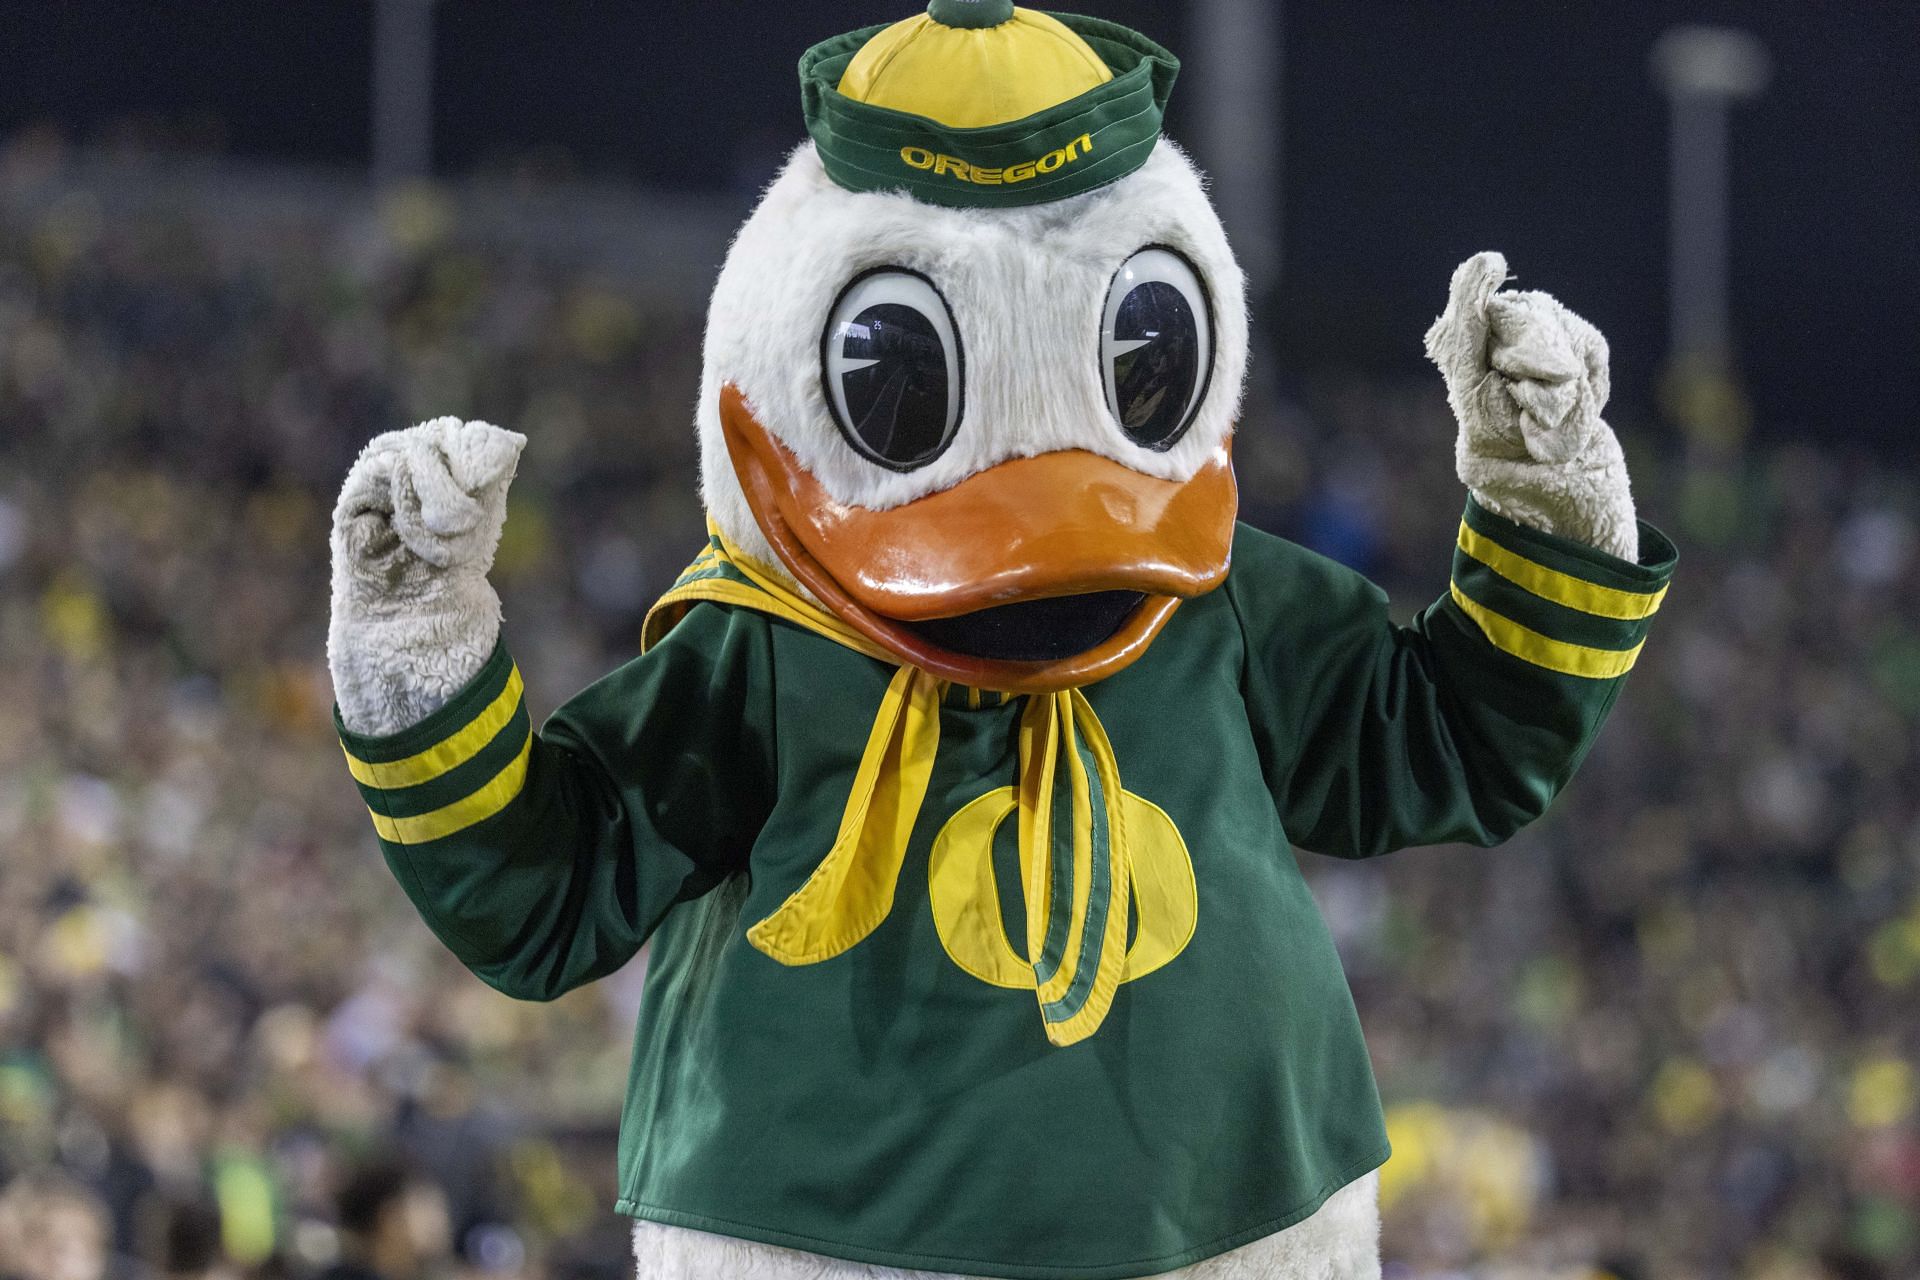 The Oregon Duck is a popular staple of Pac-12 football.